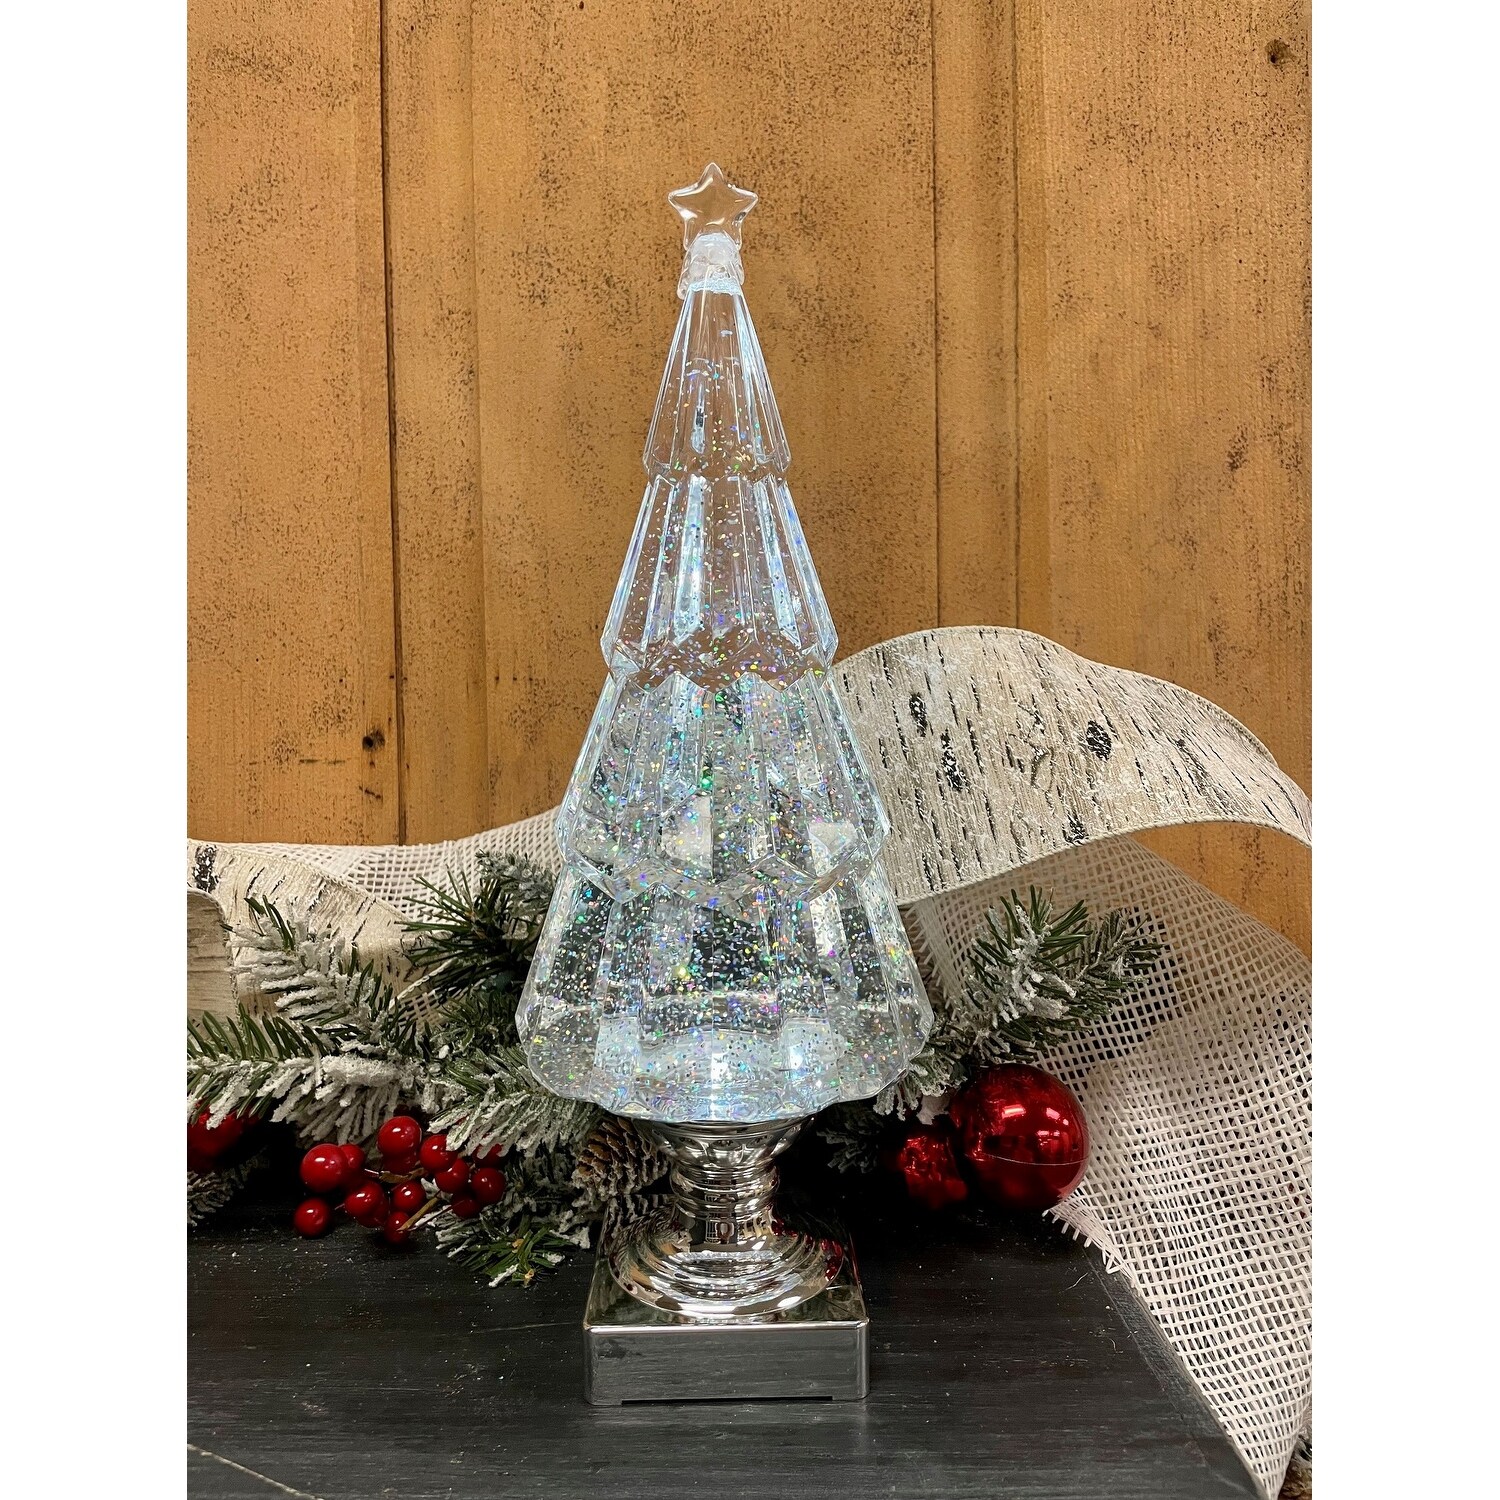 Raz Imports 13.75 Lighted Tree with Silver Swirling Glitter